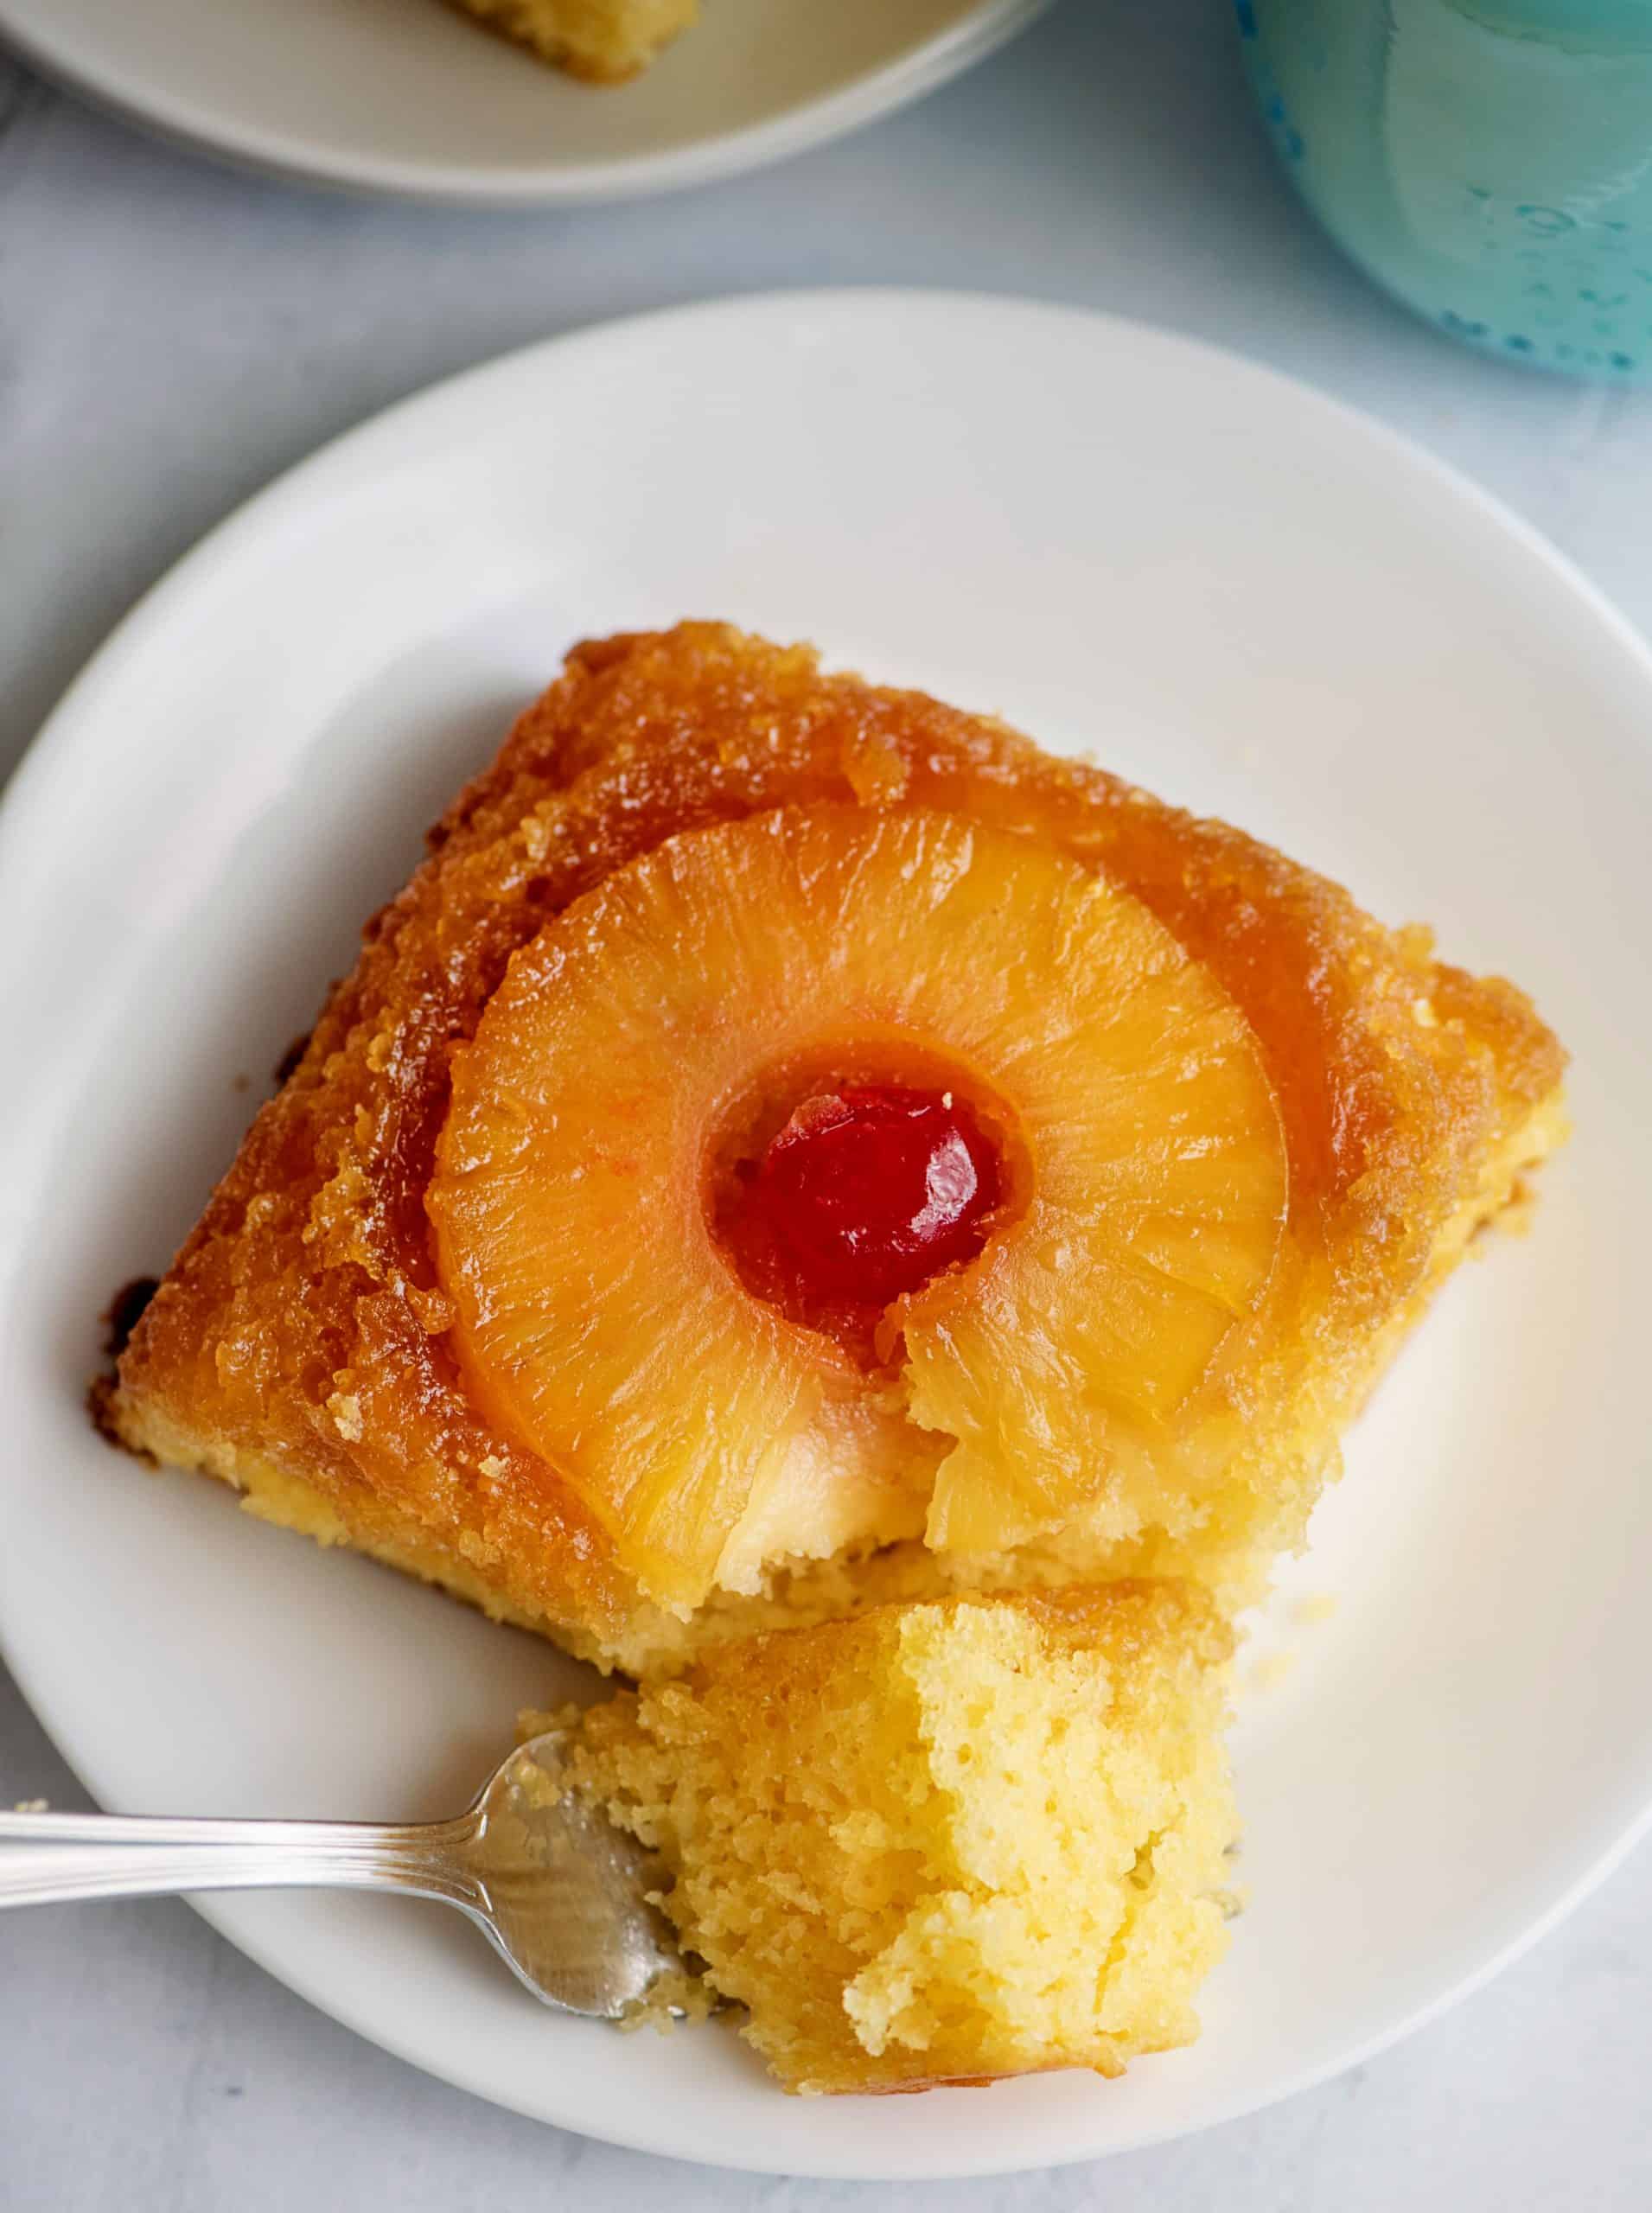 Pineapple Upside Down Cake from a Box Mix - Out of the Box Baking